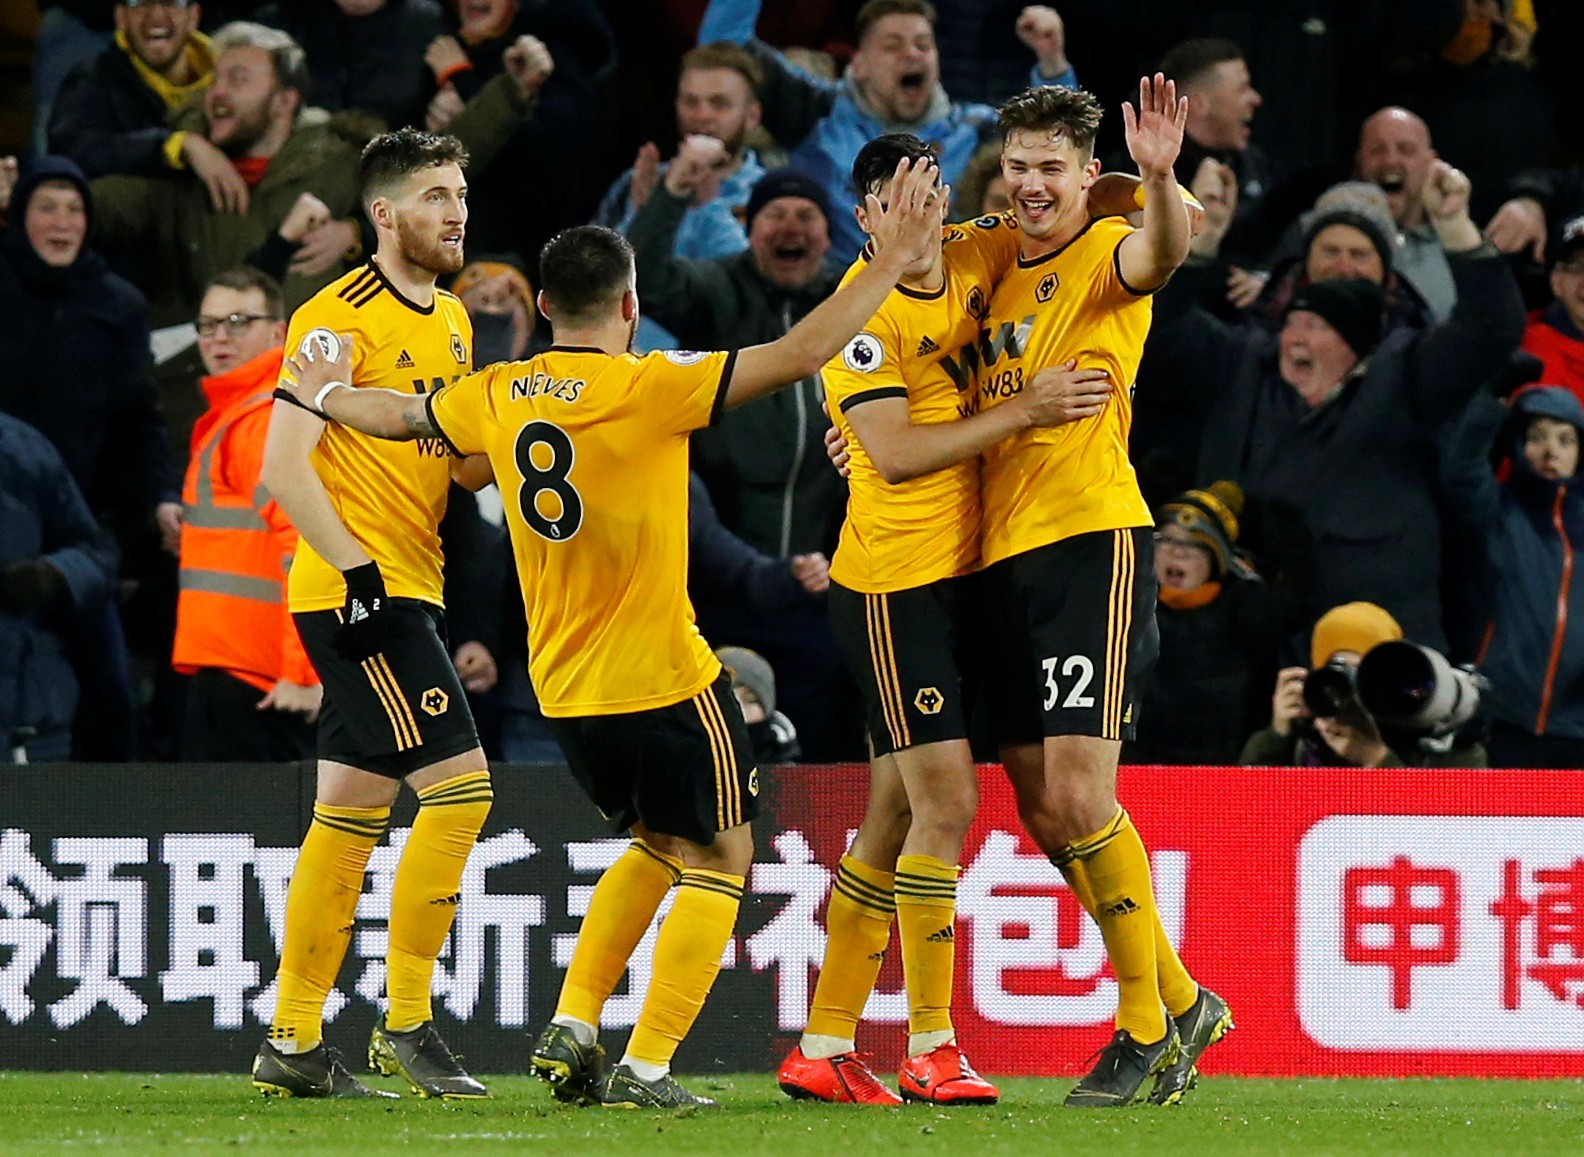 , Football betting tips TODAY: FA Cup 3rd round picks including Man Utd at Wolves, Merseyside derby and Arsenal vs Leeds